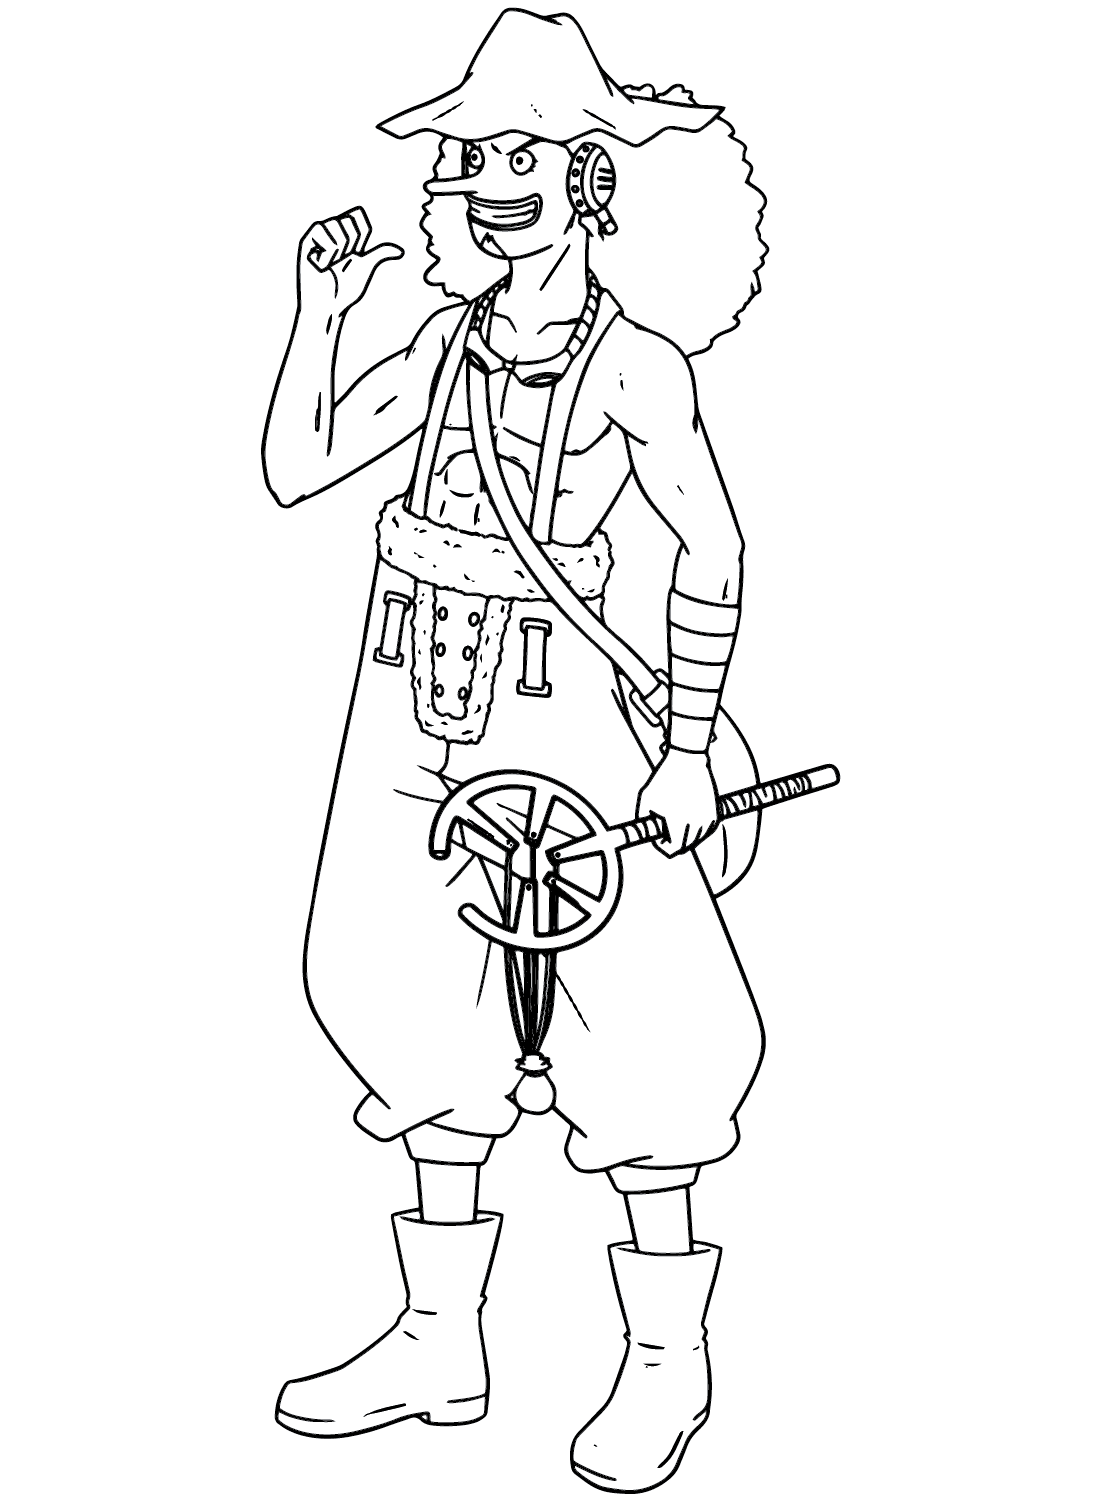 Usopp Coloring Pages to Download